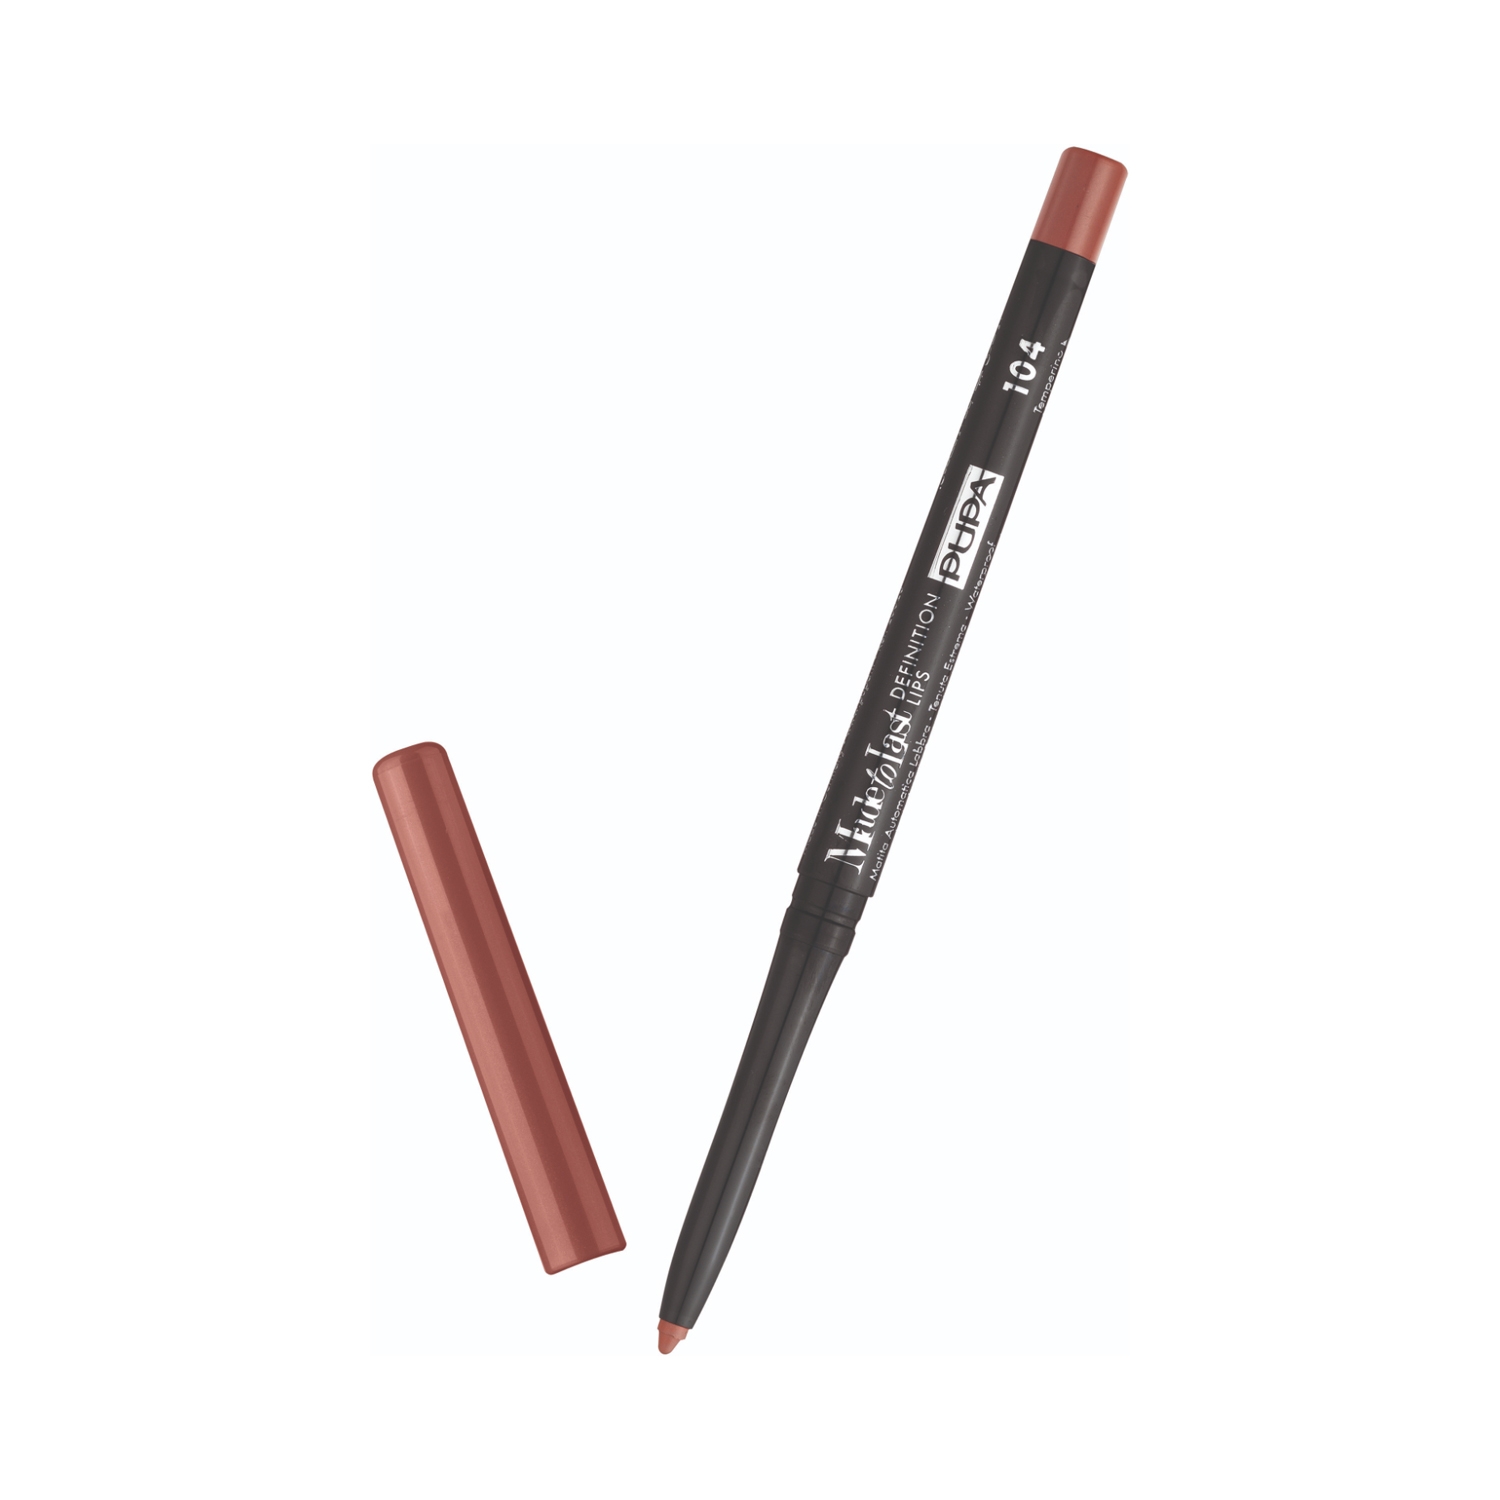 Pupa Milano Made To Last Definition Lip Pencil - 104 Rosewood (0.35g)